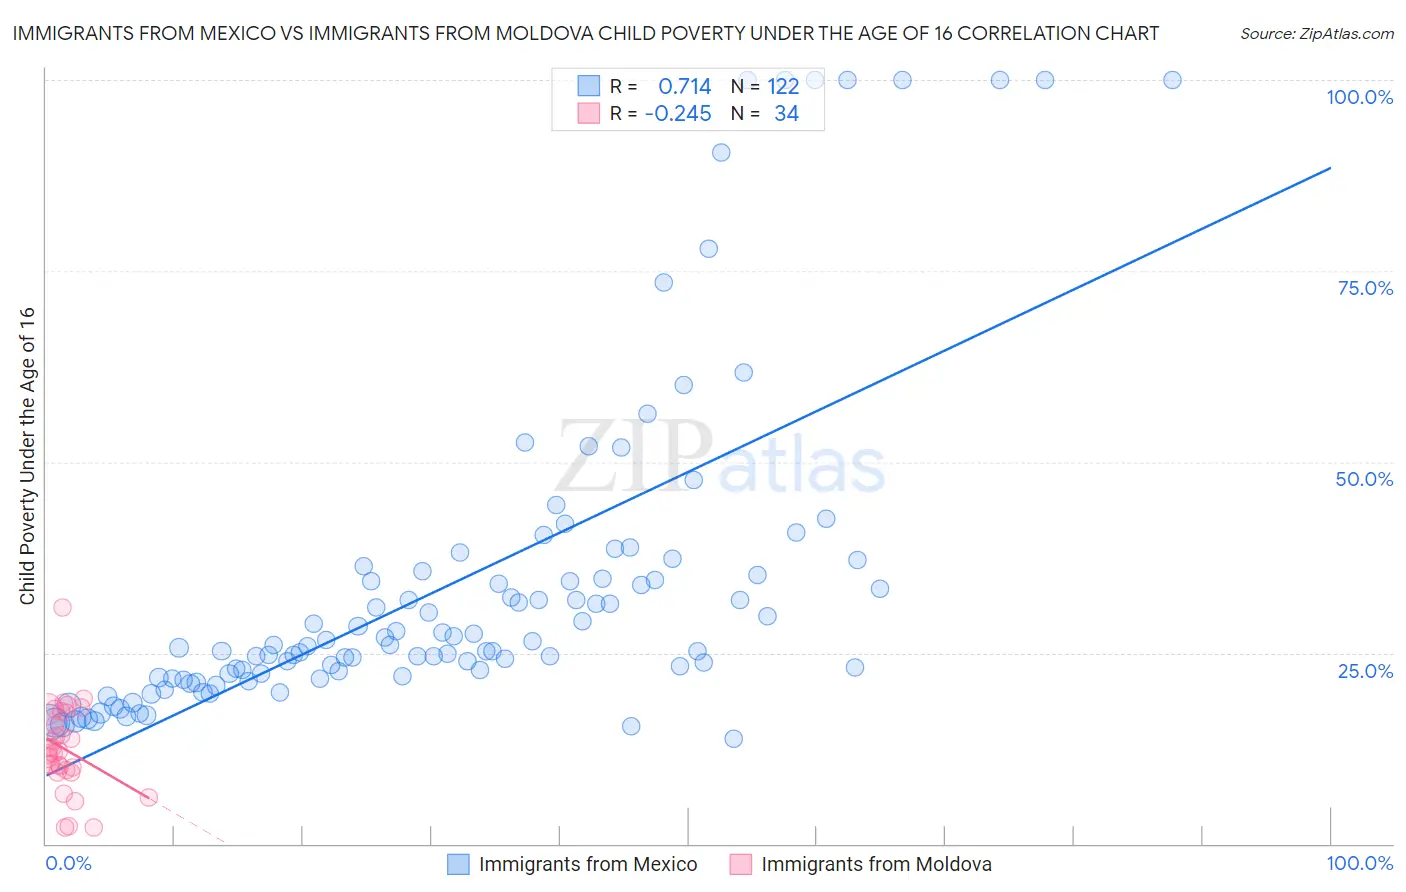 Immigrants from Mexico vs Immigrants from Moldova Child Poverty Under the Age of 16